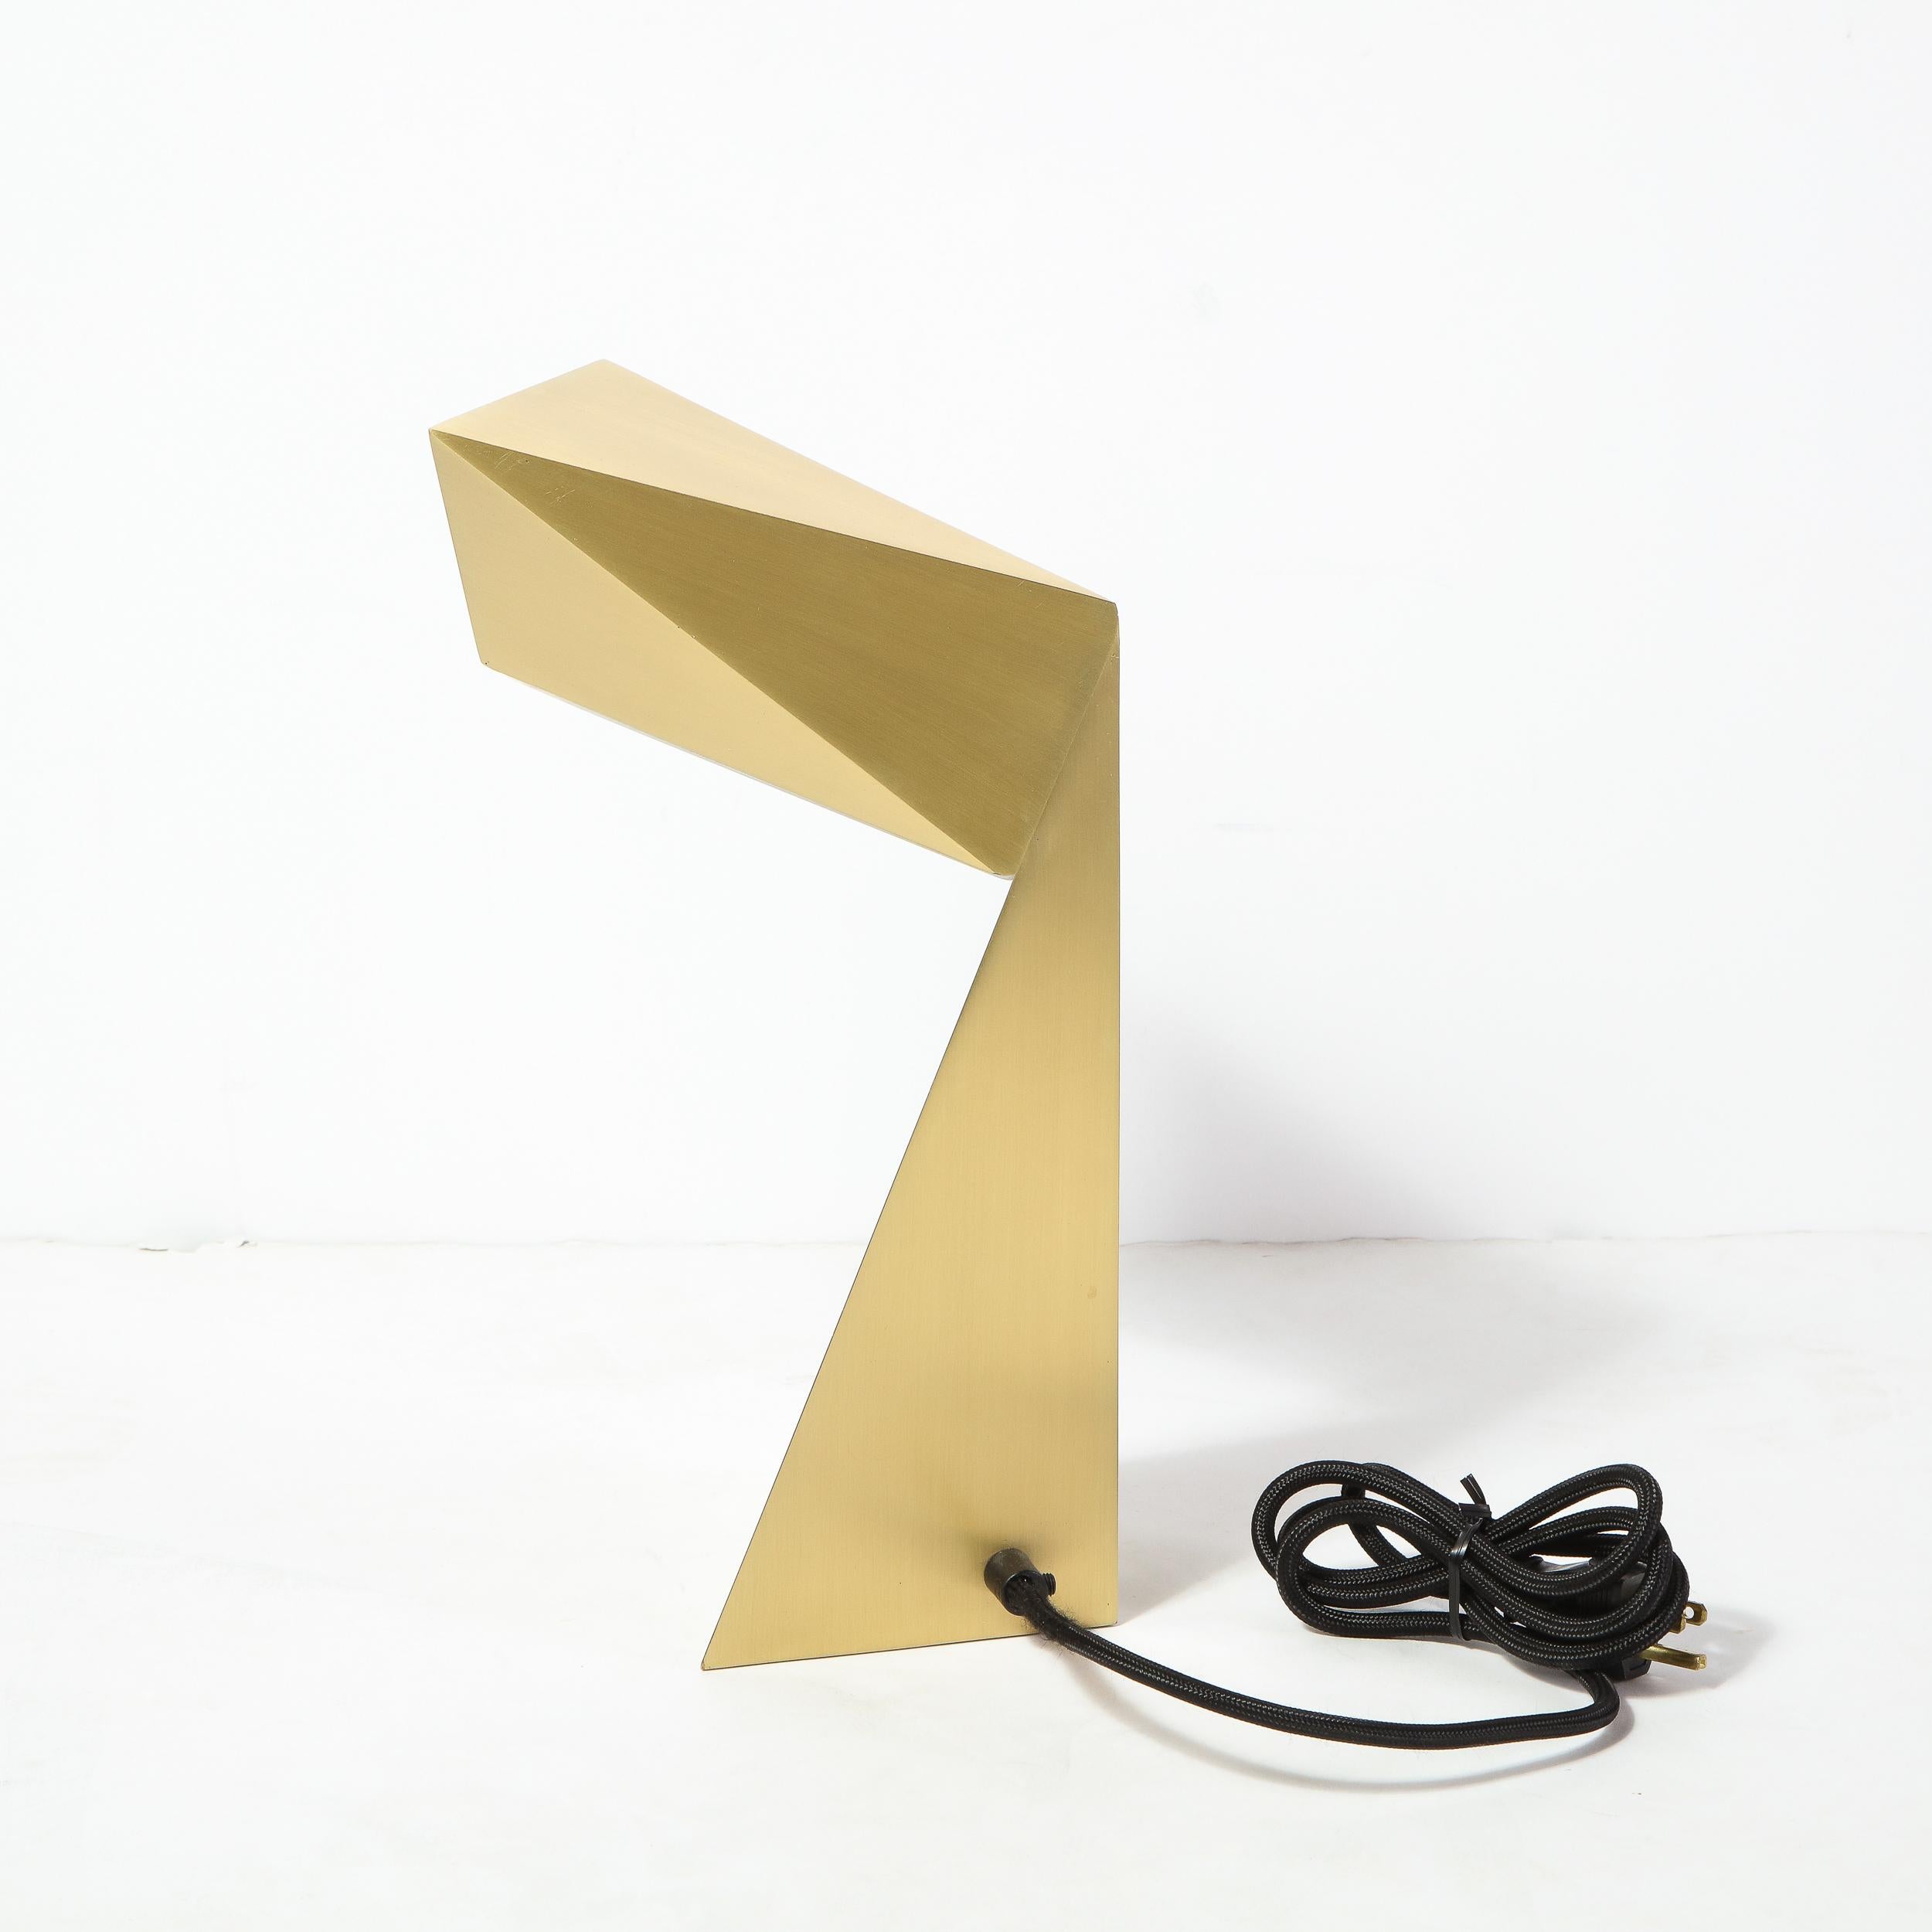 This stunning modernist Origami t desk /Table lamp was by Pouenat in the United States. It features a faceted cantilevered body in brushed brass, whose forward looking design recalls the influence of space age designs and Italian futurism. With its